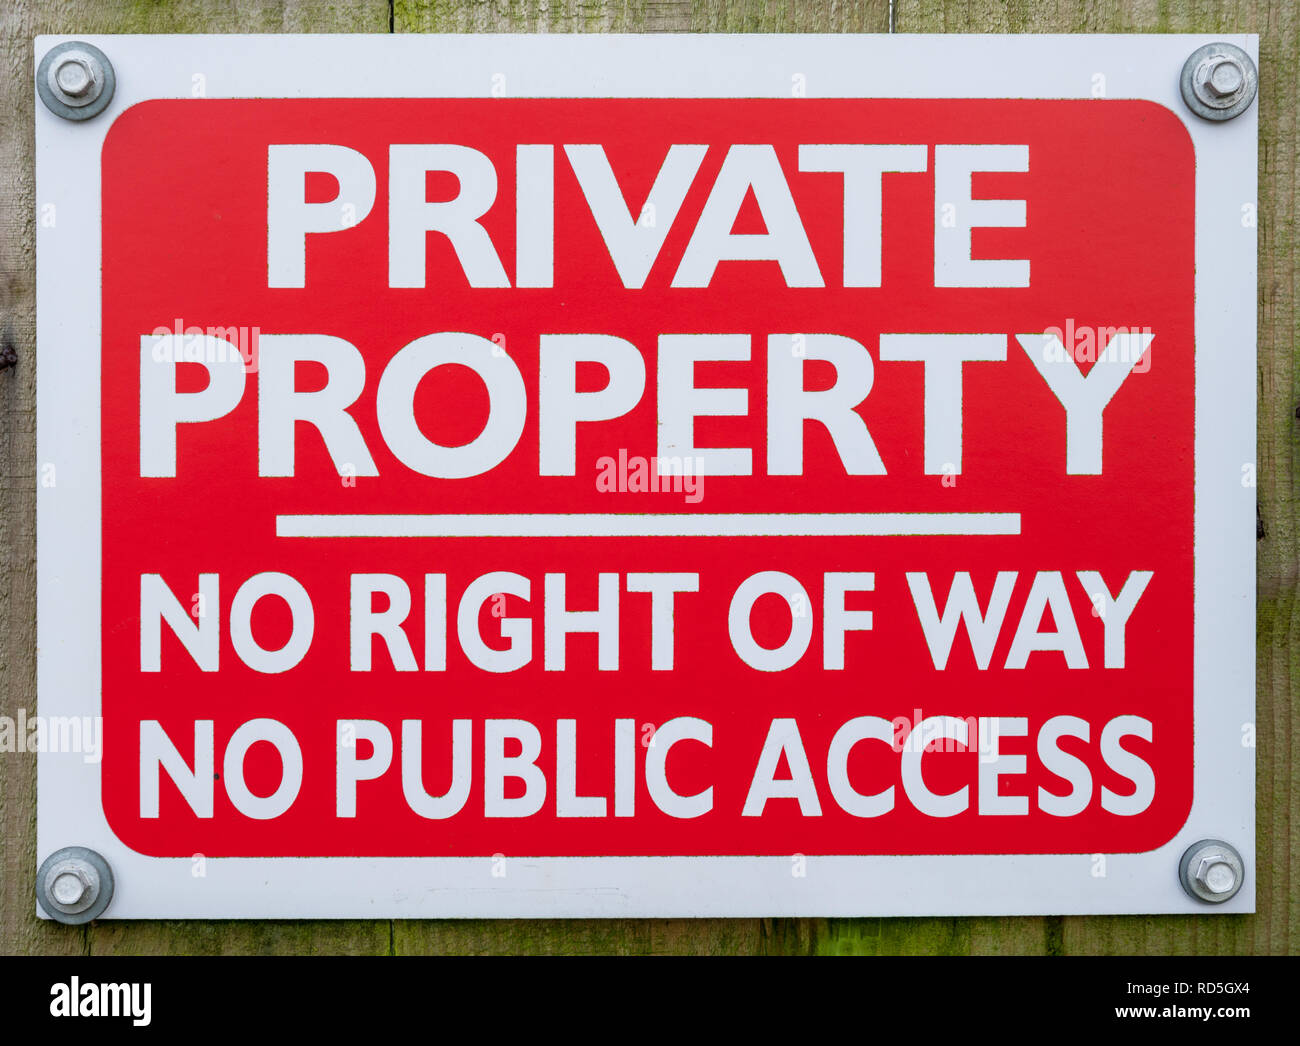 Private Property sign - white text on red background Stock Photo